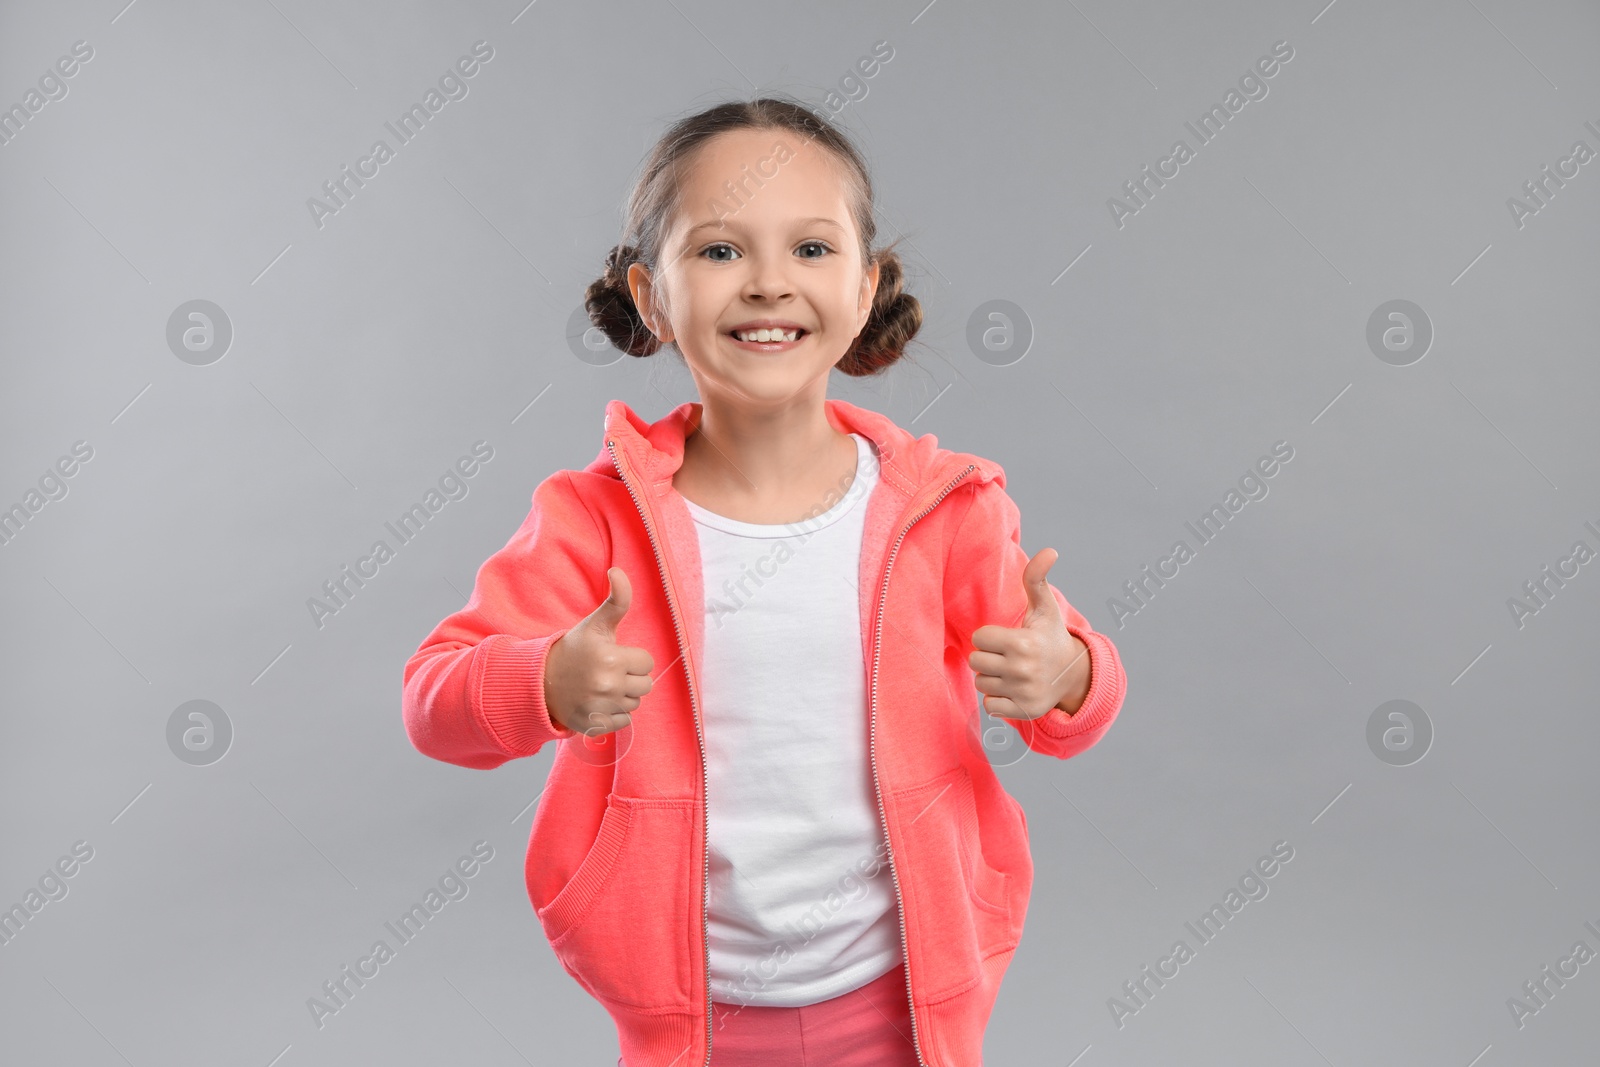 Photo of Cute little girl showing thumbs up on grey background